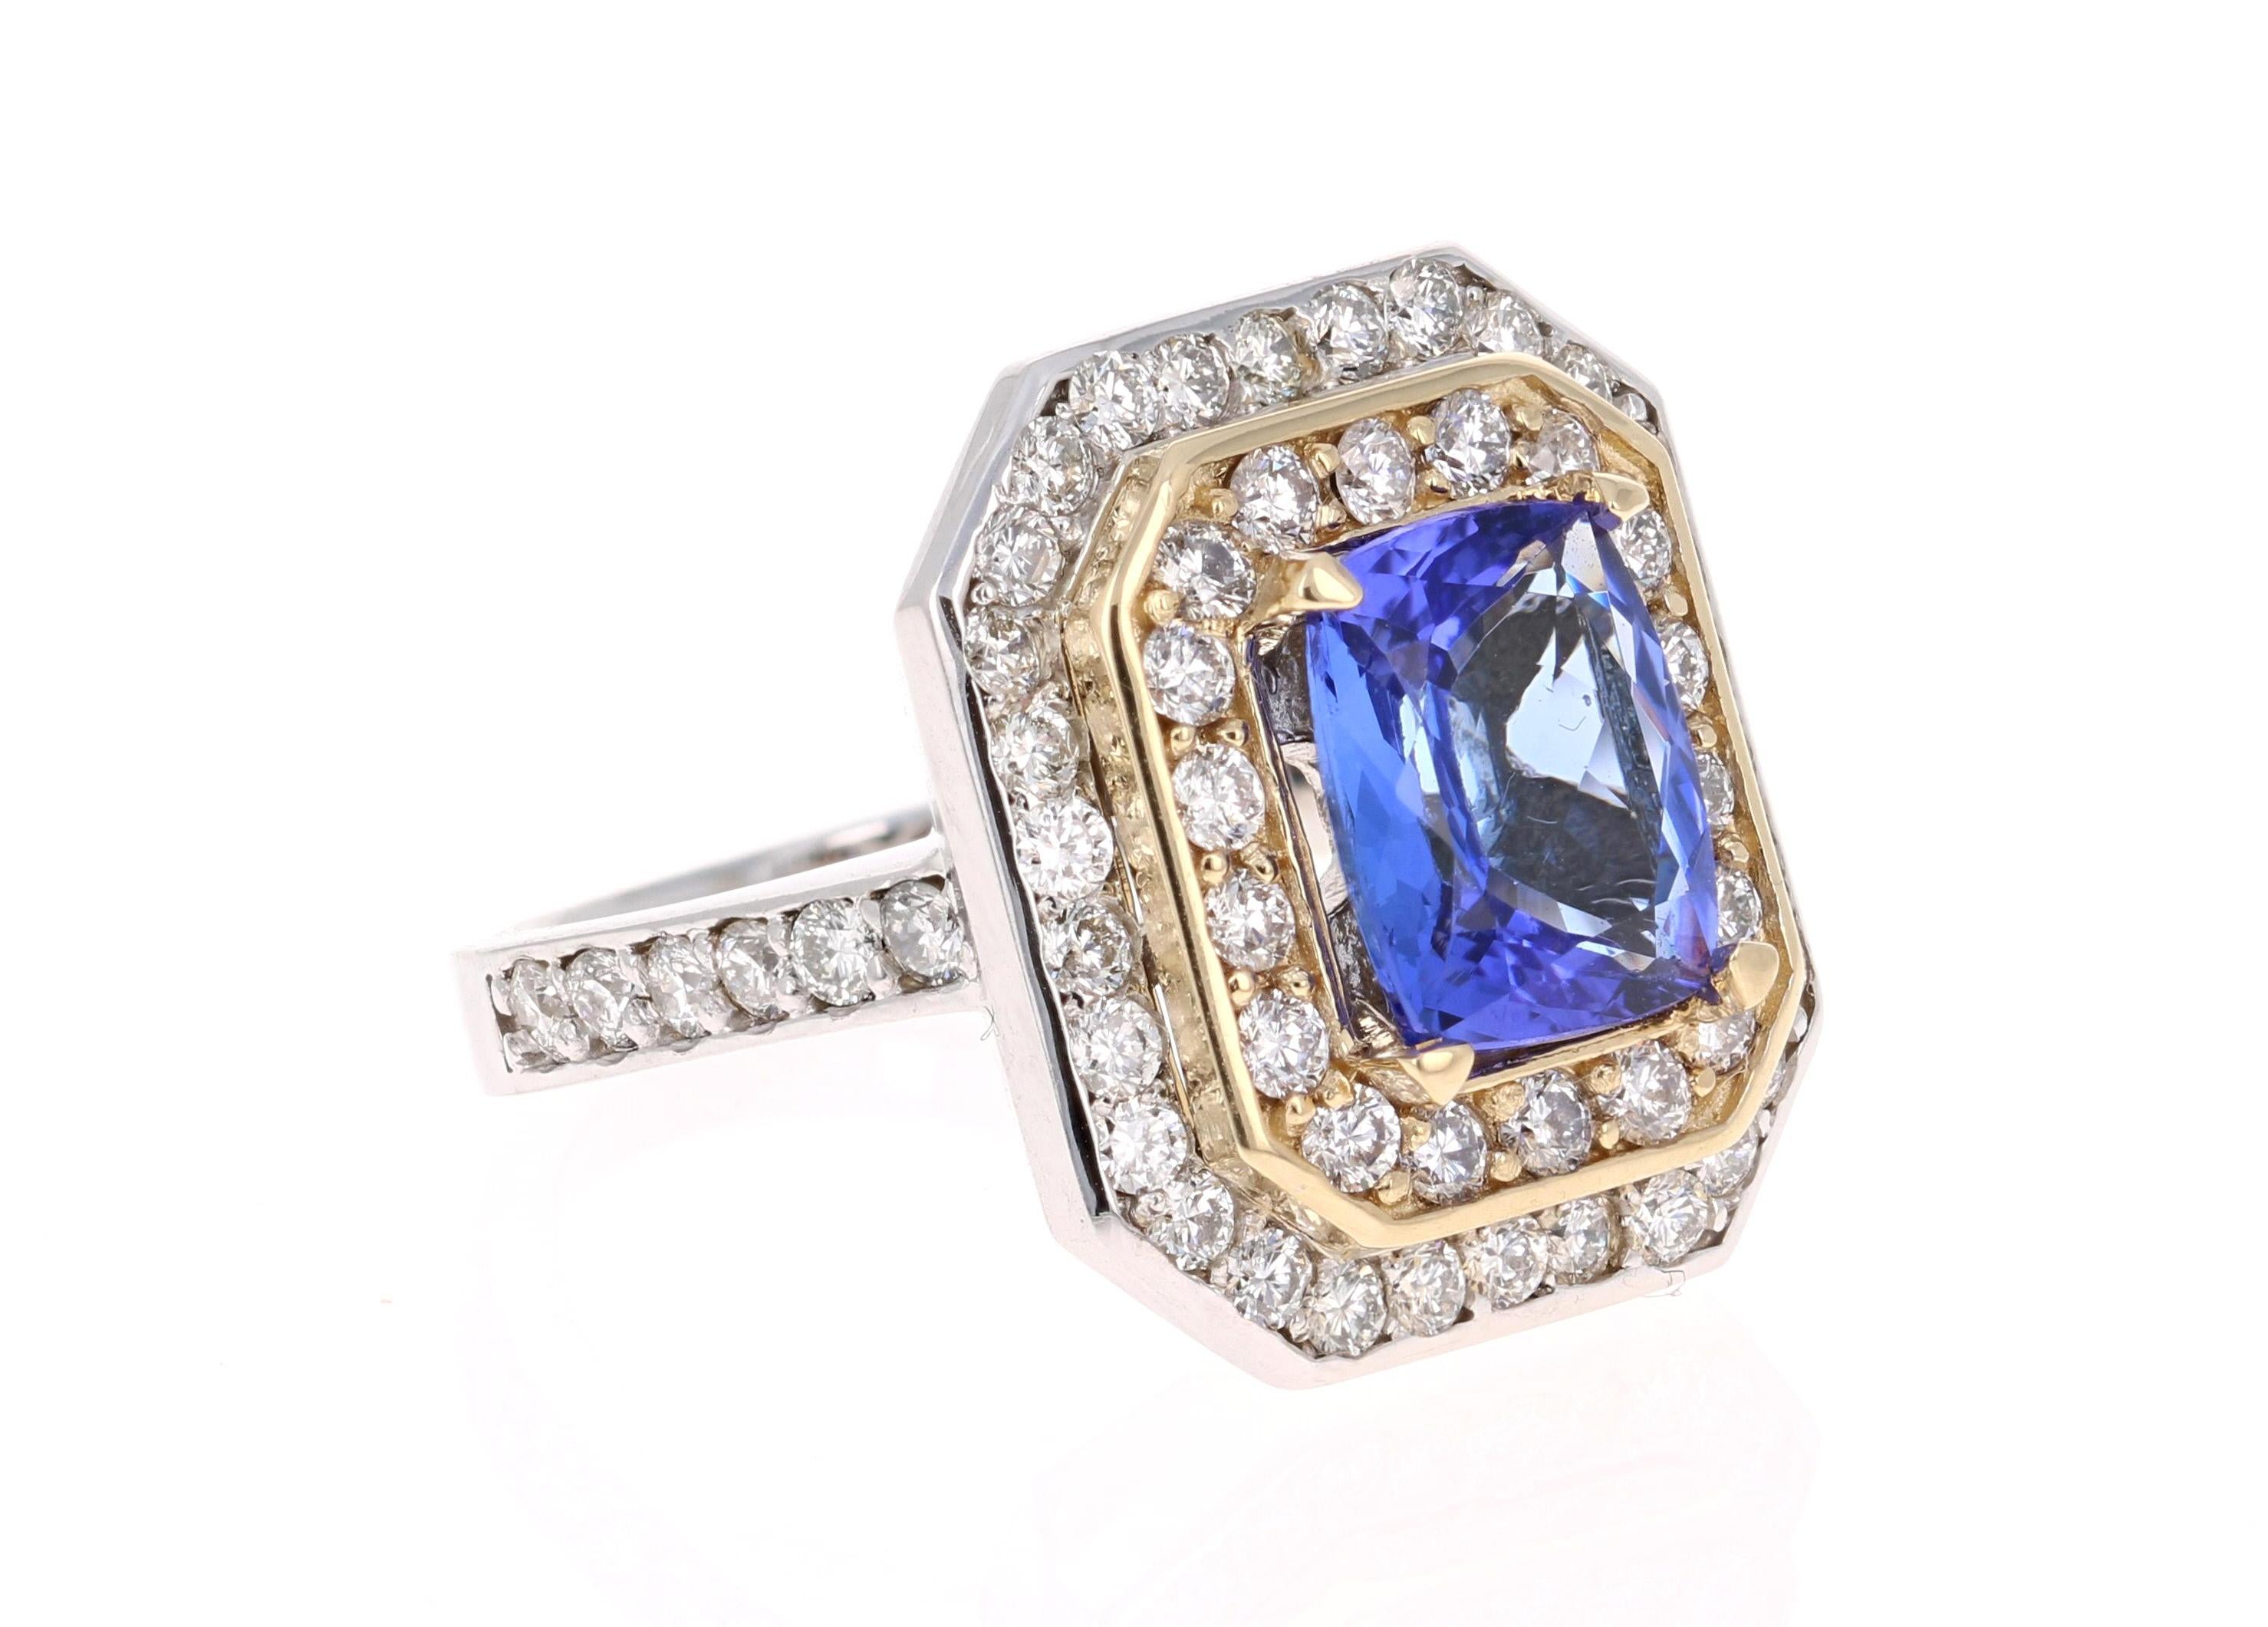 Elegant & Magnificent, Classic Tanzanite & Diamond Ring! 

This ring has a radiant bluish-purple Oval-Cushion Cut Tanzanite weighing 2.84 Carats. It is surrounded by a double halo of 60 Round Cut Diamonds that weigh 1.62 Carats with a clarity and